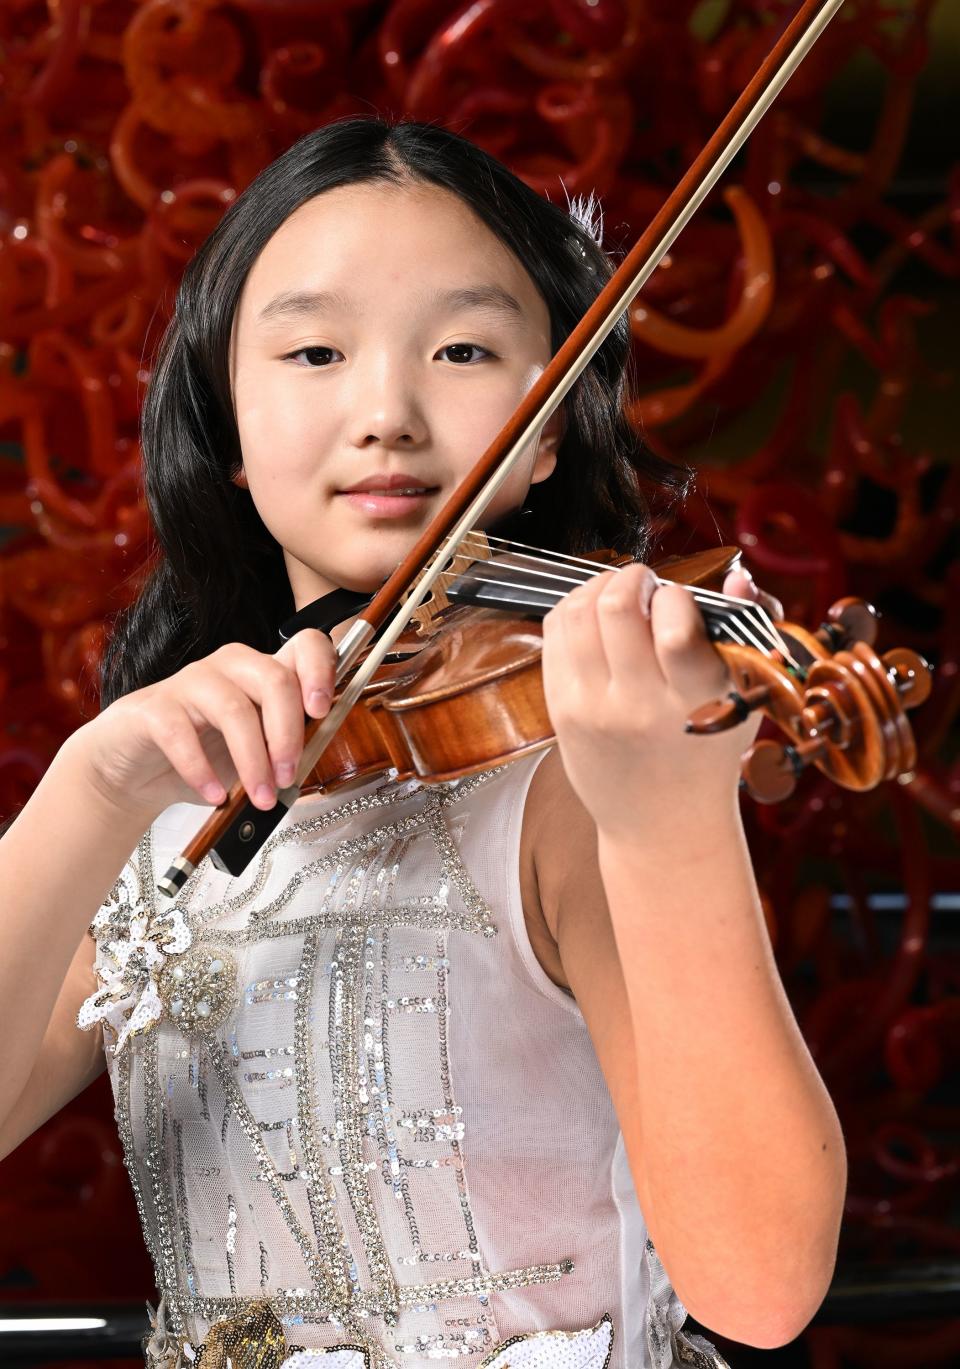 Deann Huang, violinist, poses for photos for the 2023 Salute to Youth Portraits at Abravanel Hall in Salt Lake City on Wednesday, Oct. 4, 2023. | Scott G Winterton, Deseret News